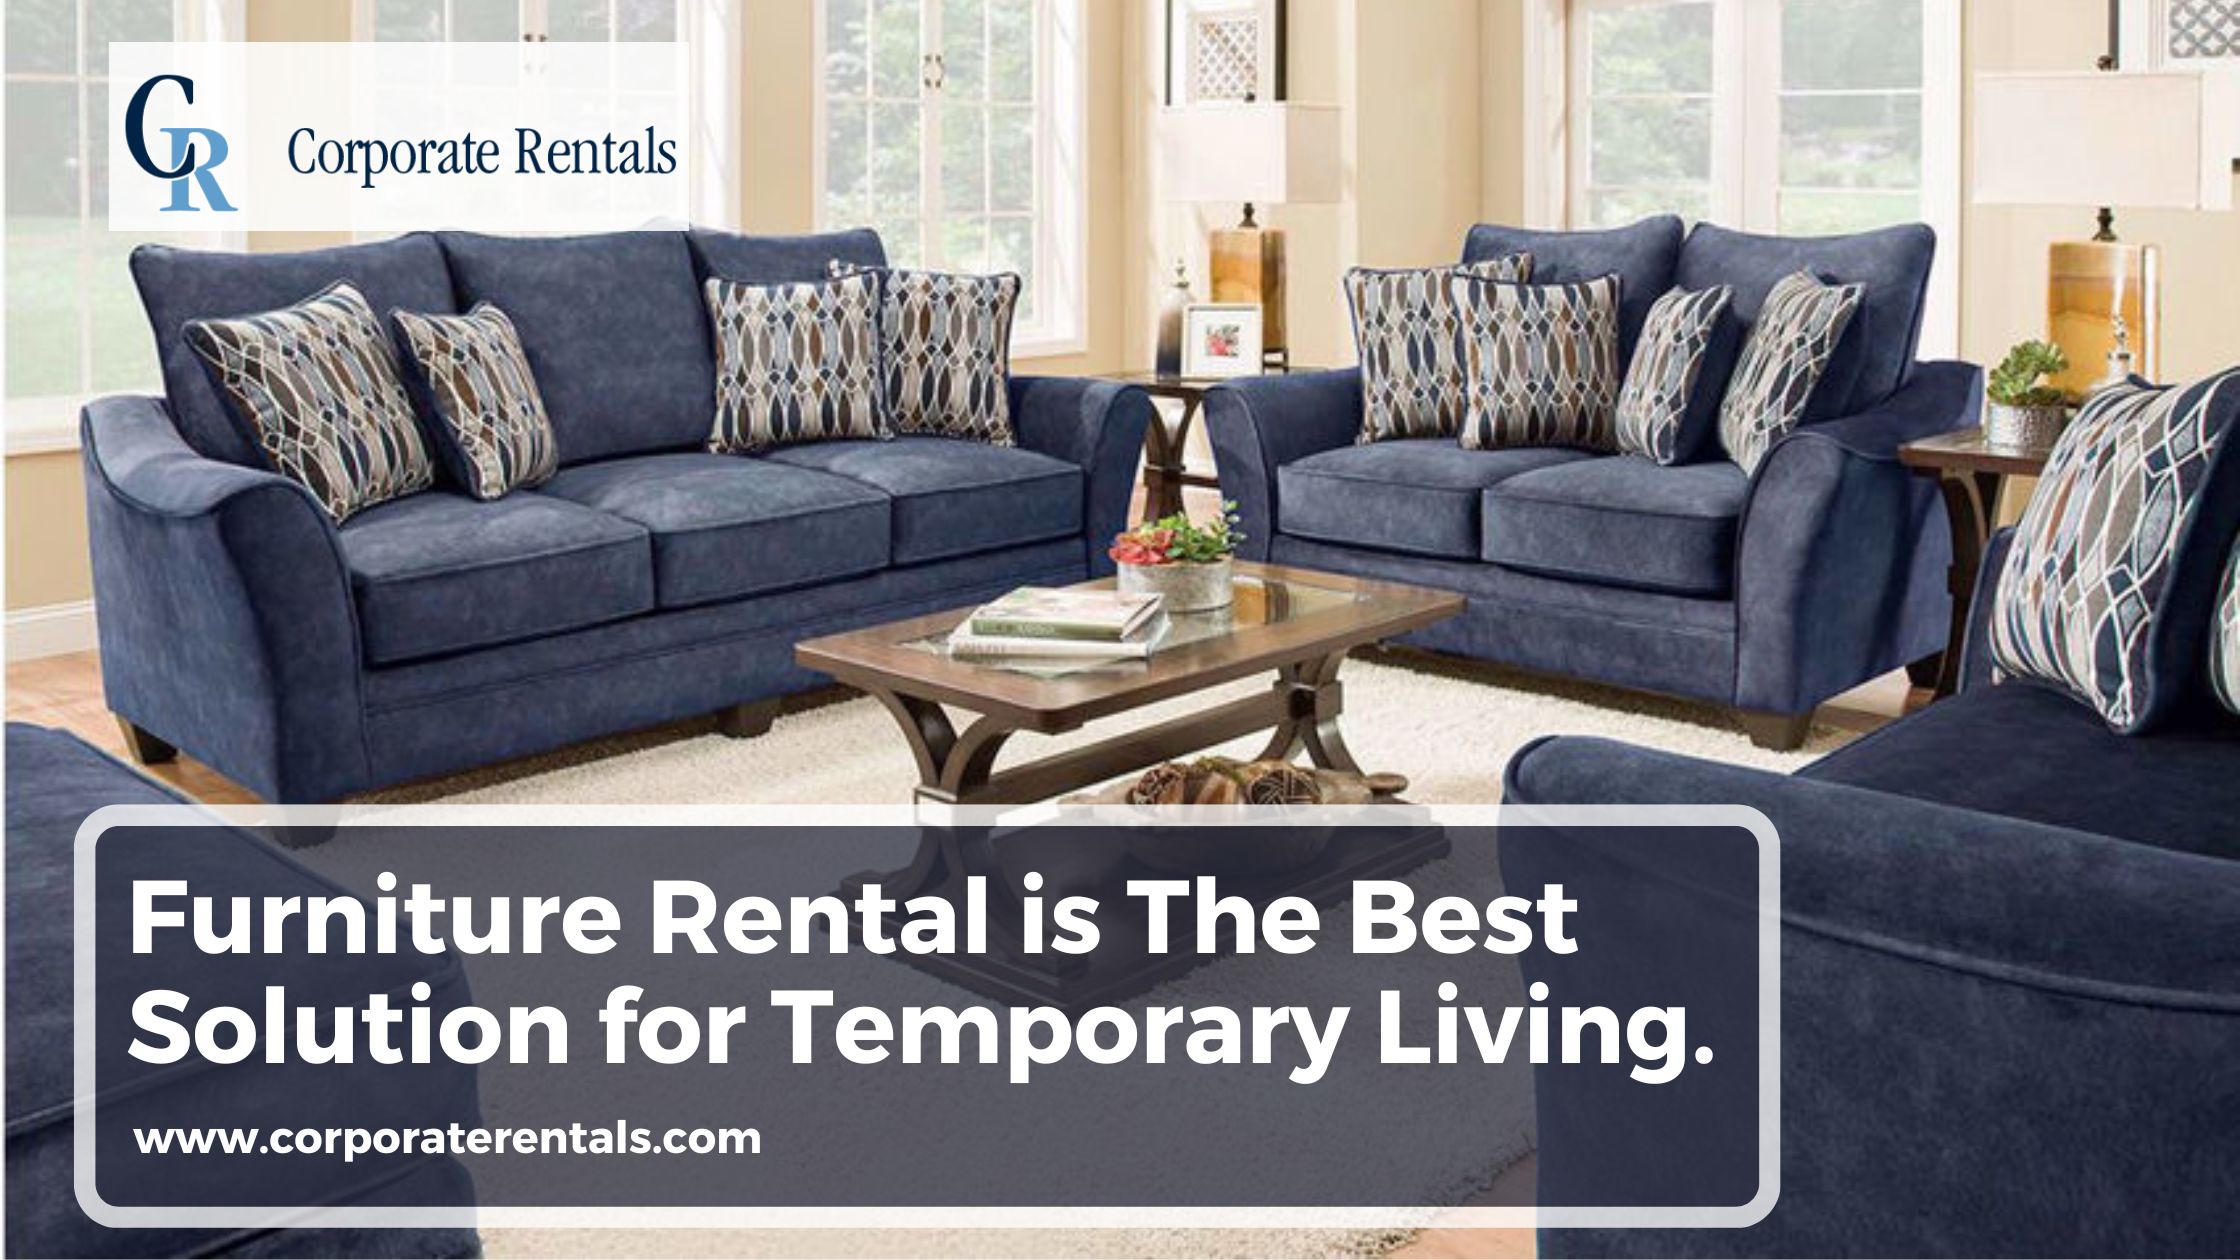 Furniture Rental is The Best Solution for Temporary Living.